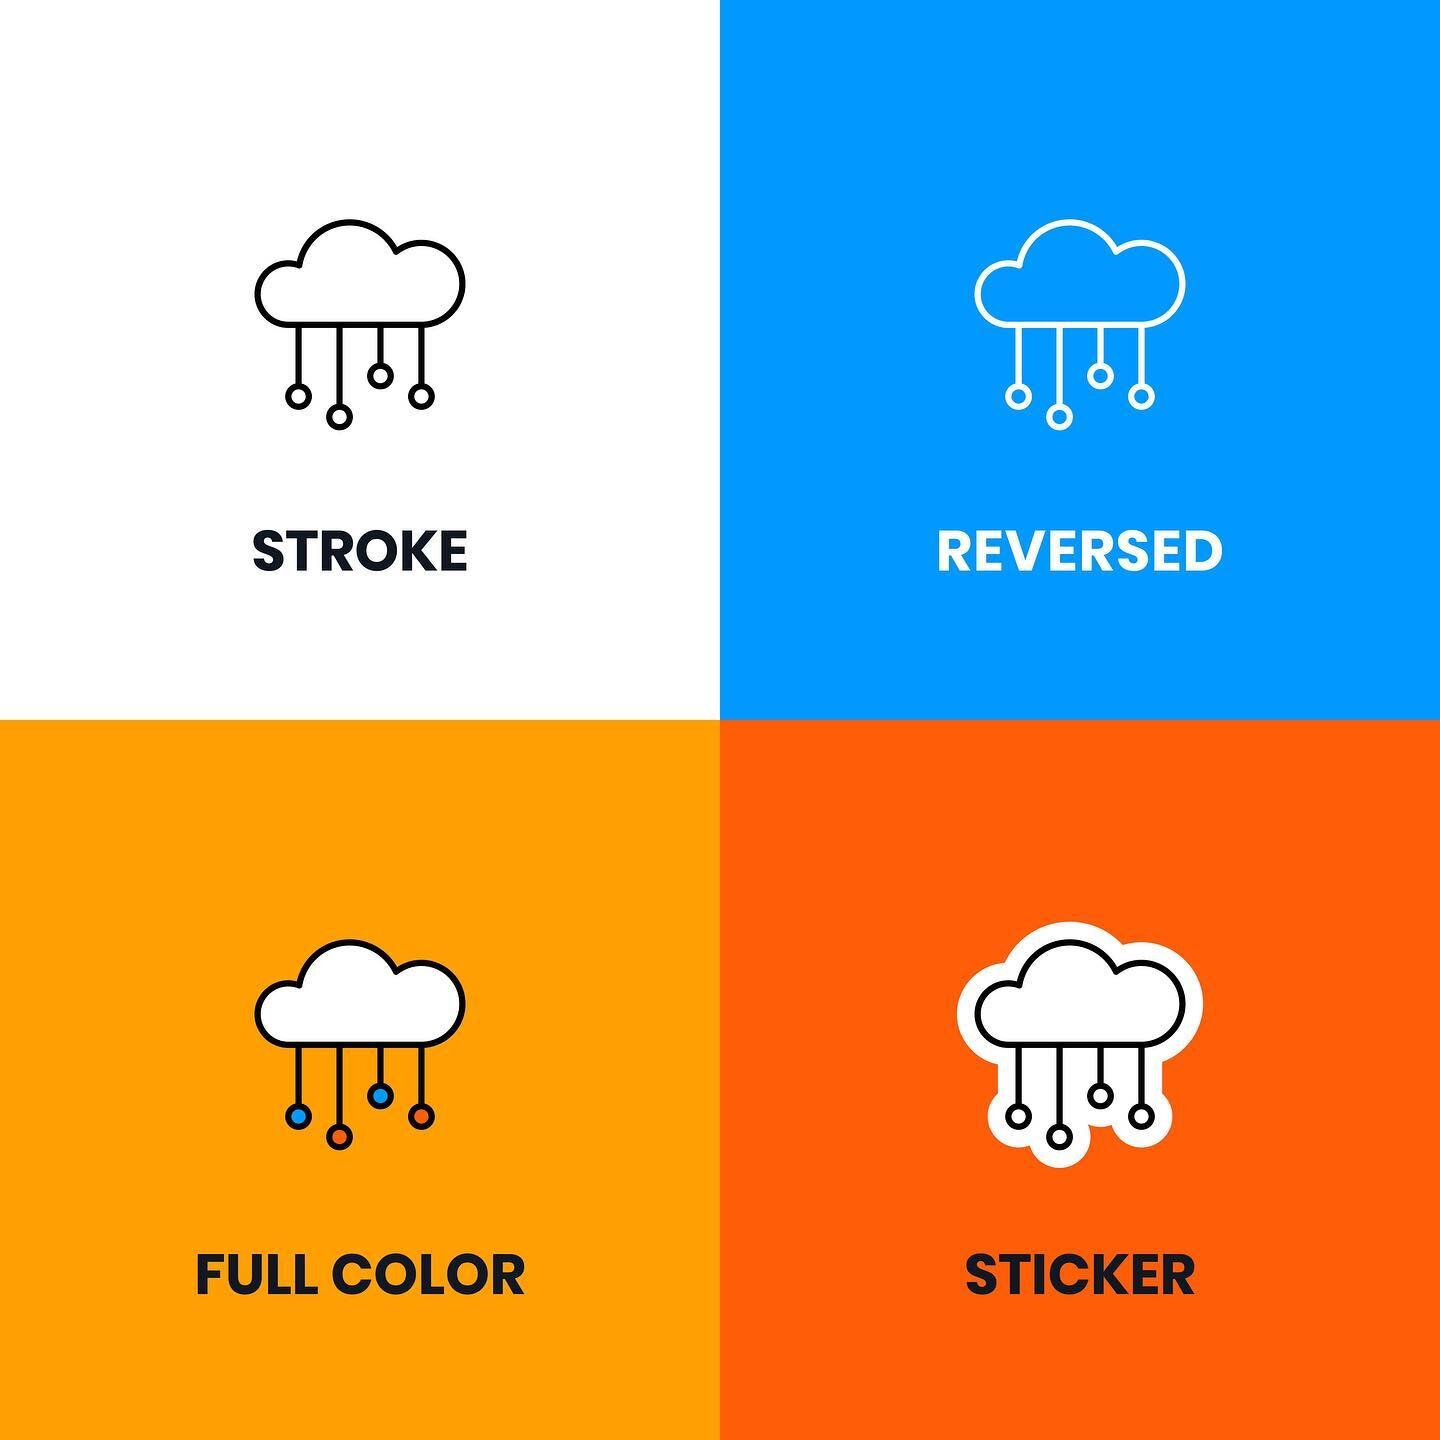 One icon, four ways: We're loving the sticker look. Search &quot;cloud&quot; at OneDollarIcons.com.

#icon #iconaday #iconography #graphicdesign #design #designer #logo #illustration #branding #graphic #logodesign #creative #typography #marketing #dr